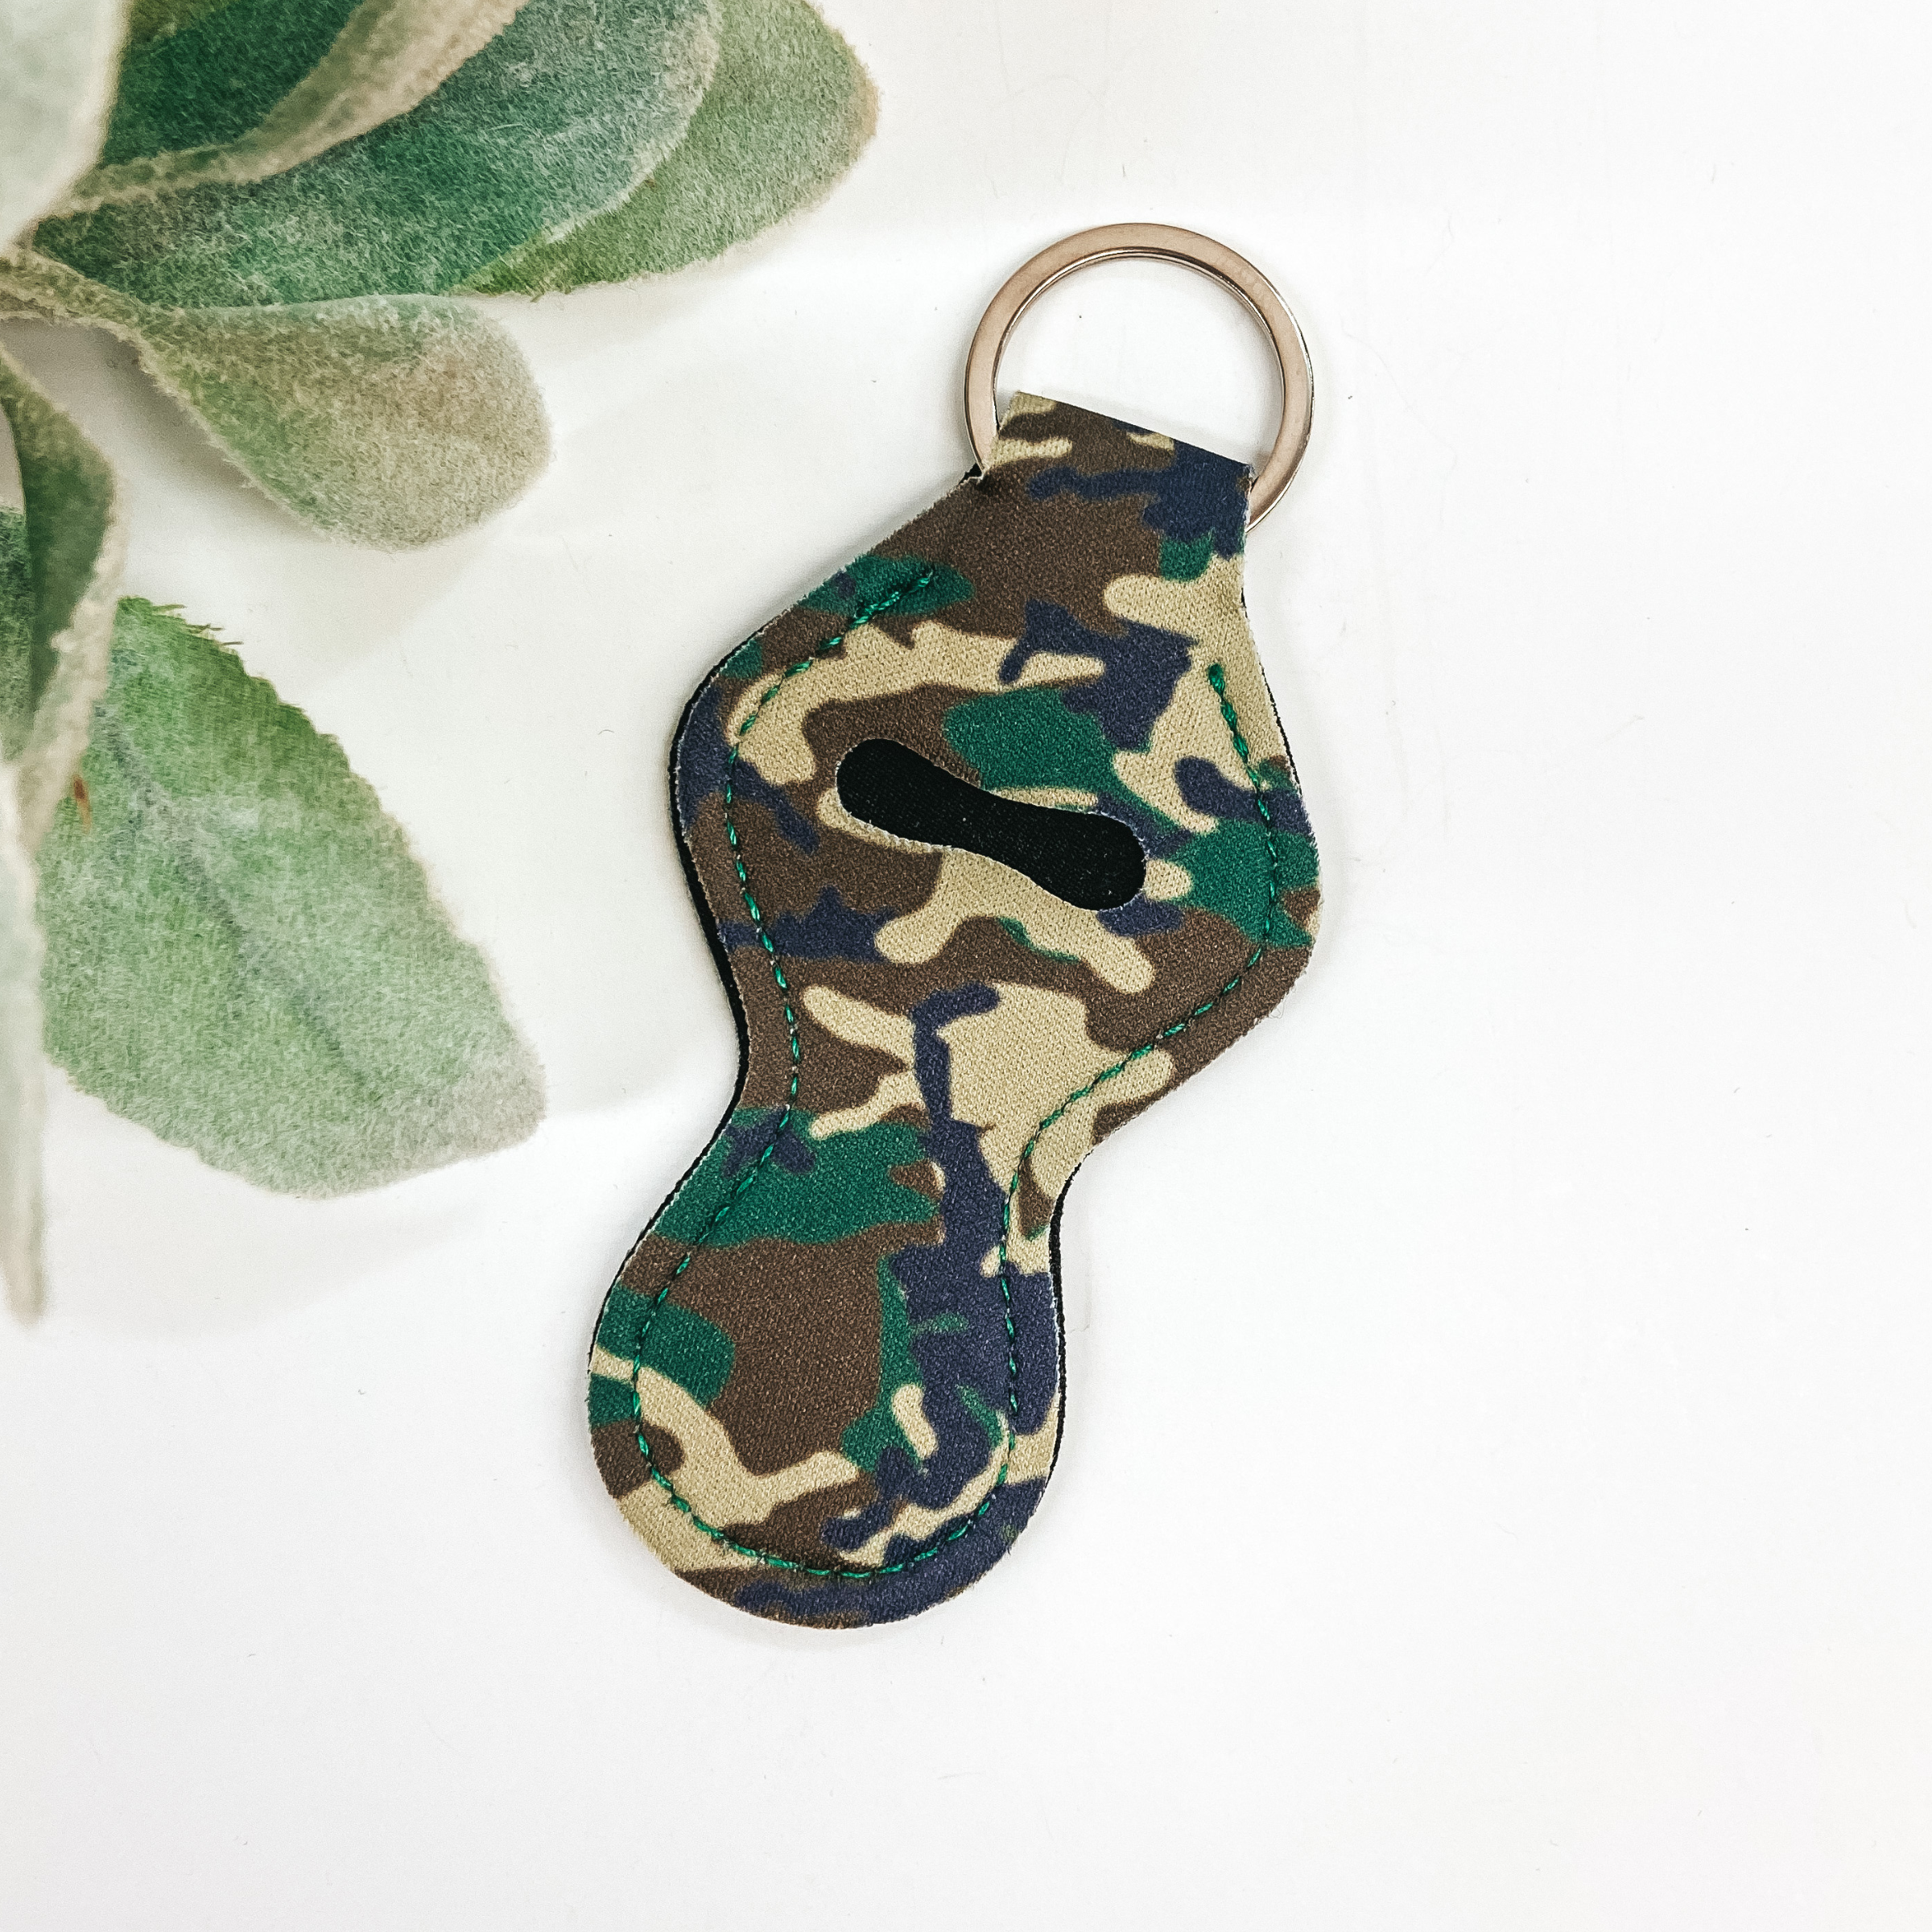 Lip Balm Holder in Camouflage - Giddy Up Glamour Boutique